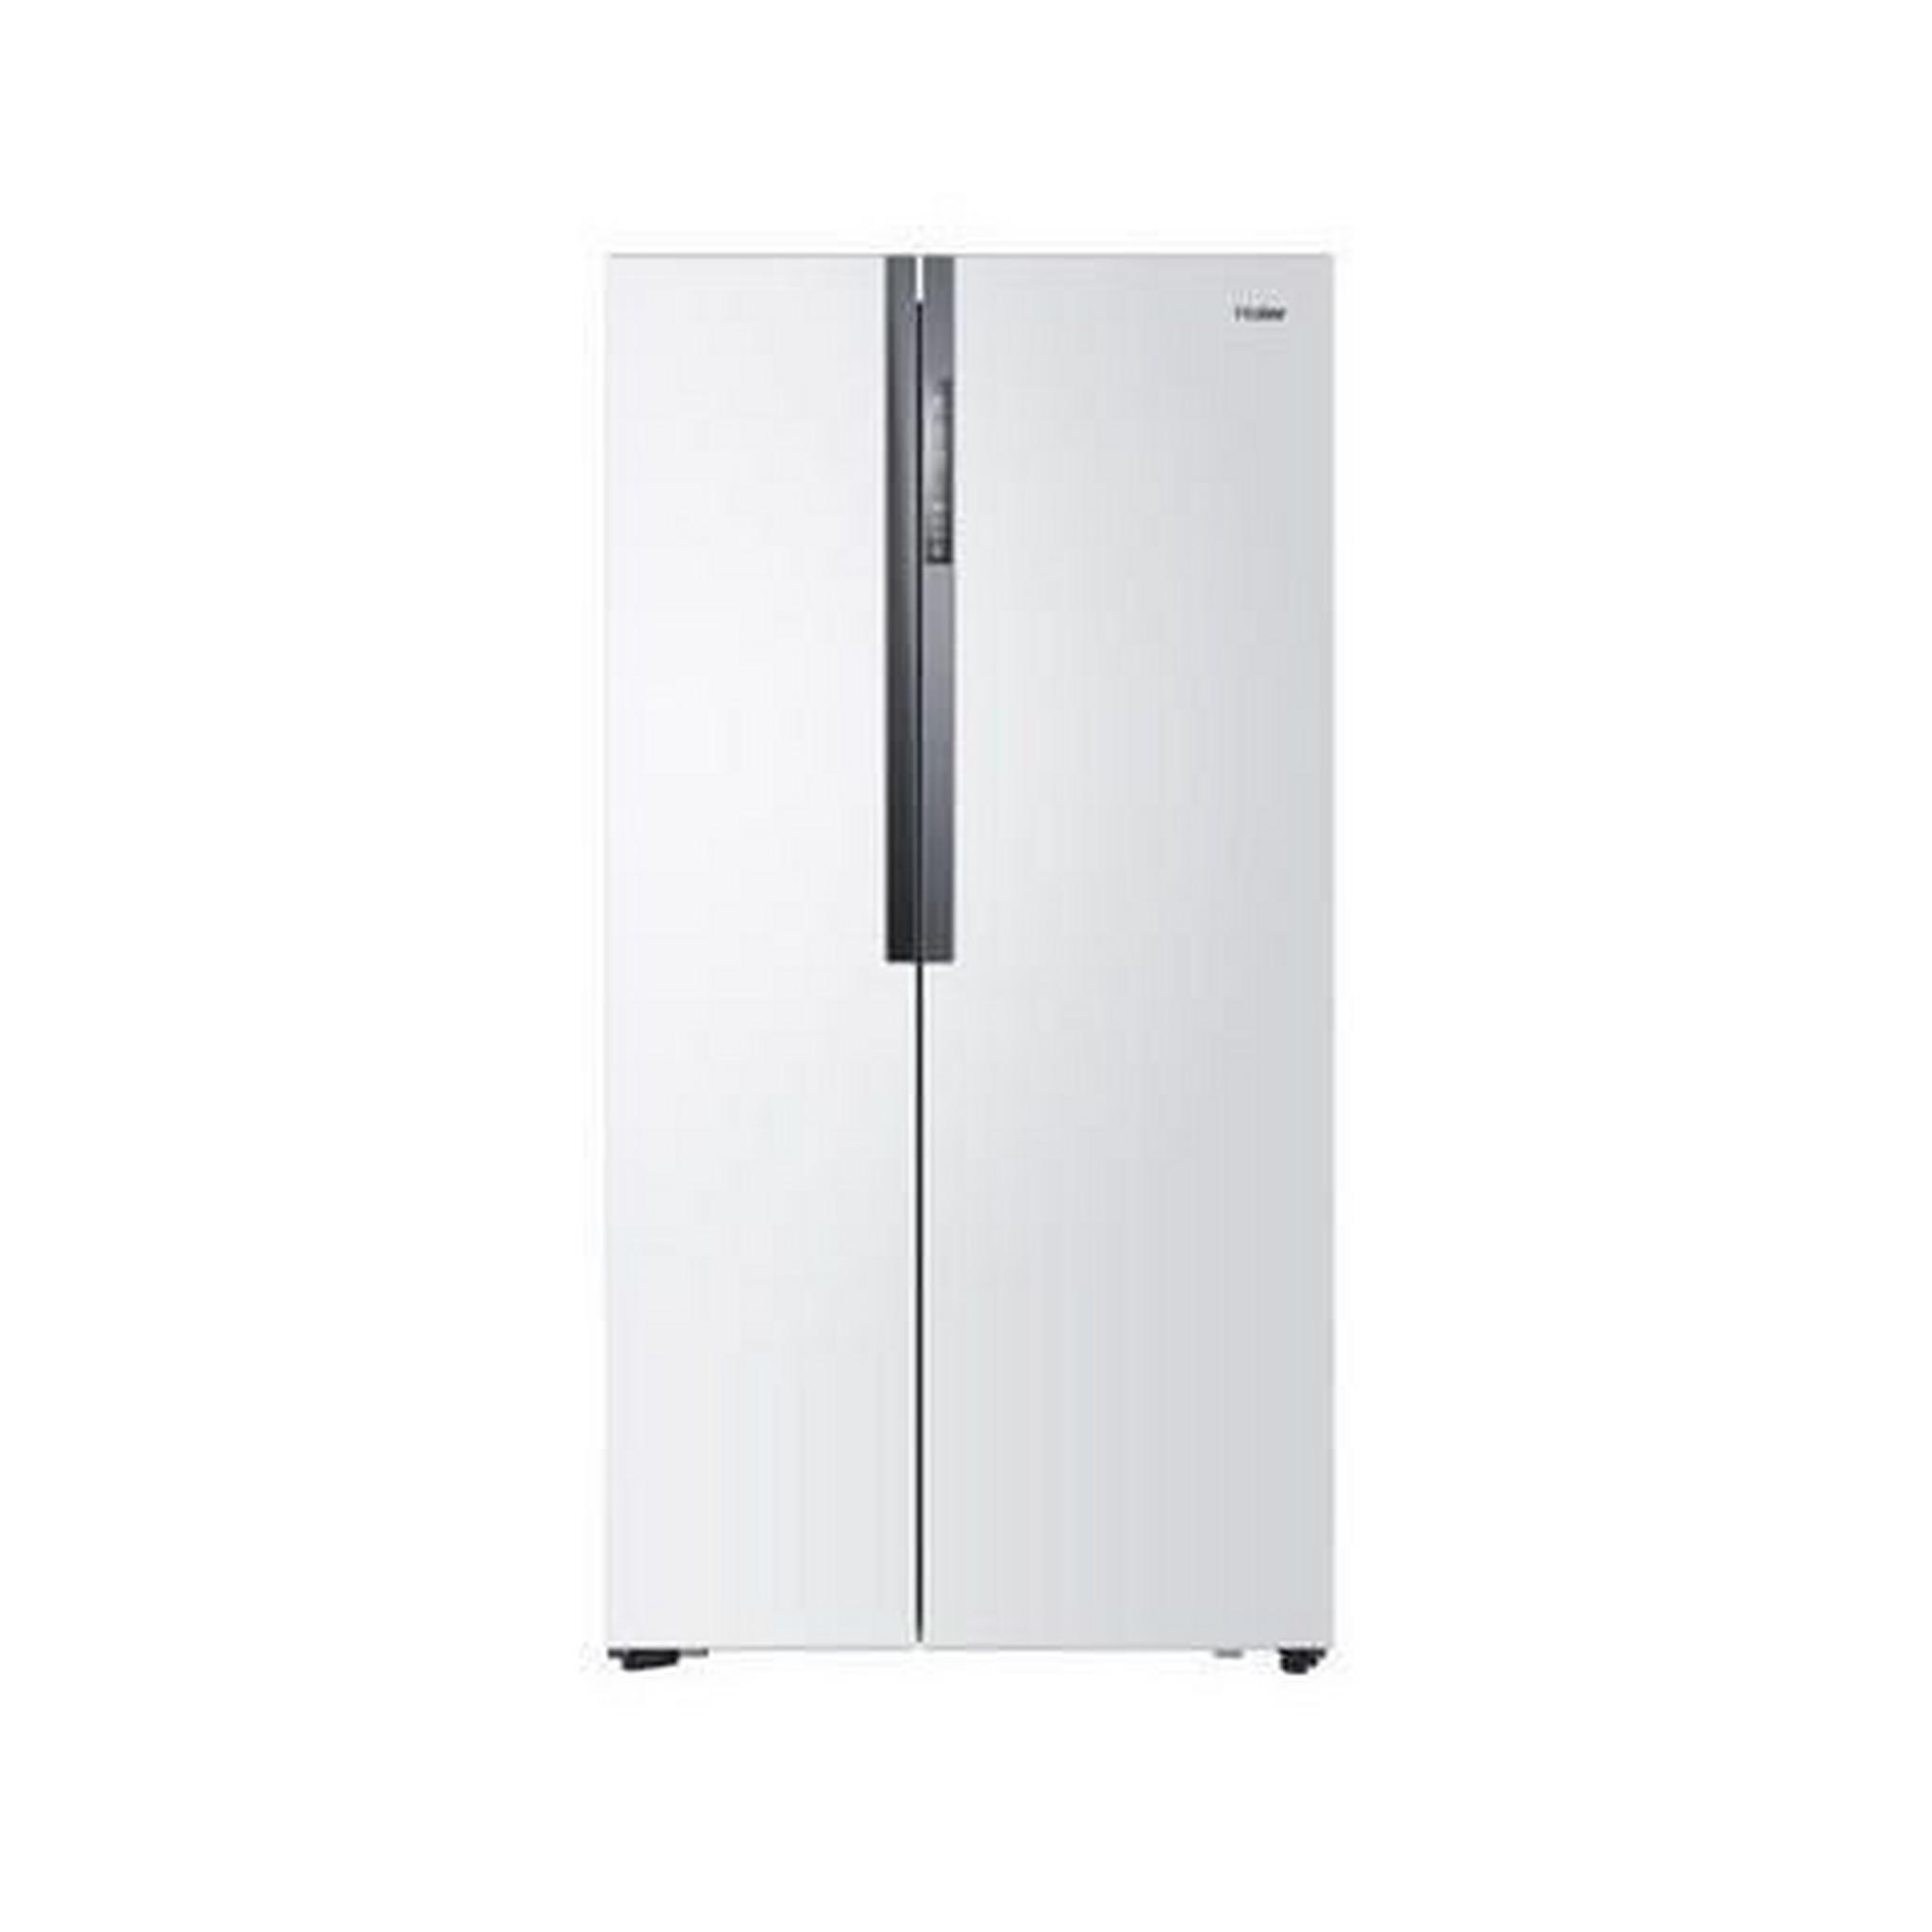 Haier 17.9CFT Side by Side Refrigerator (HRF-618DW6-3) - White